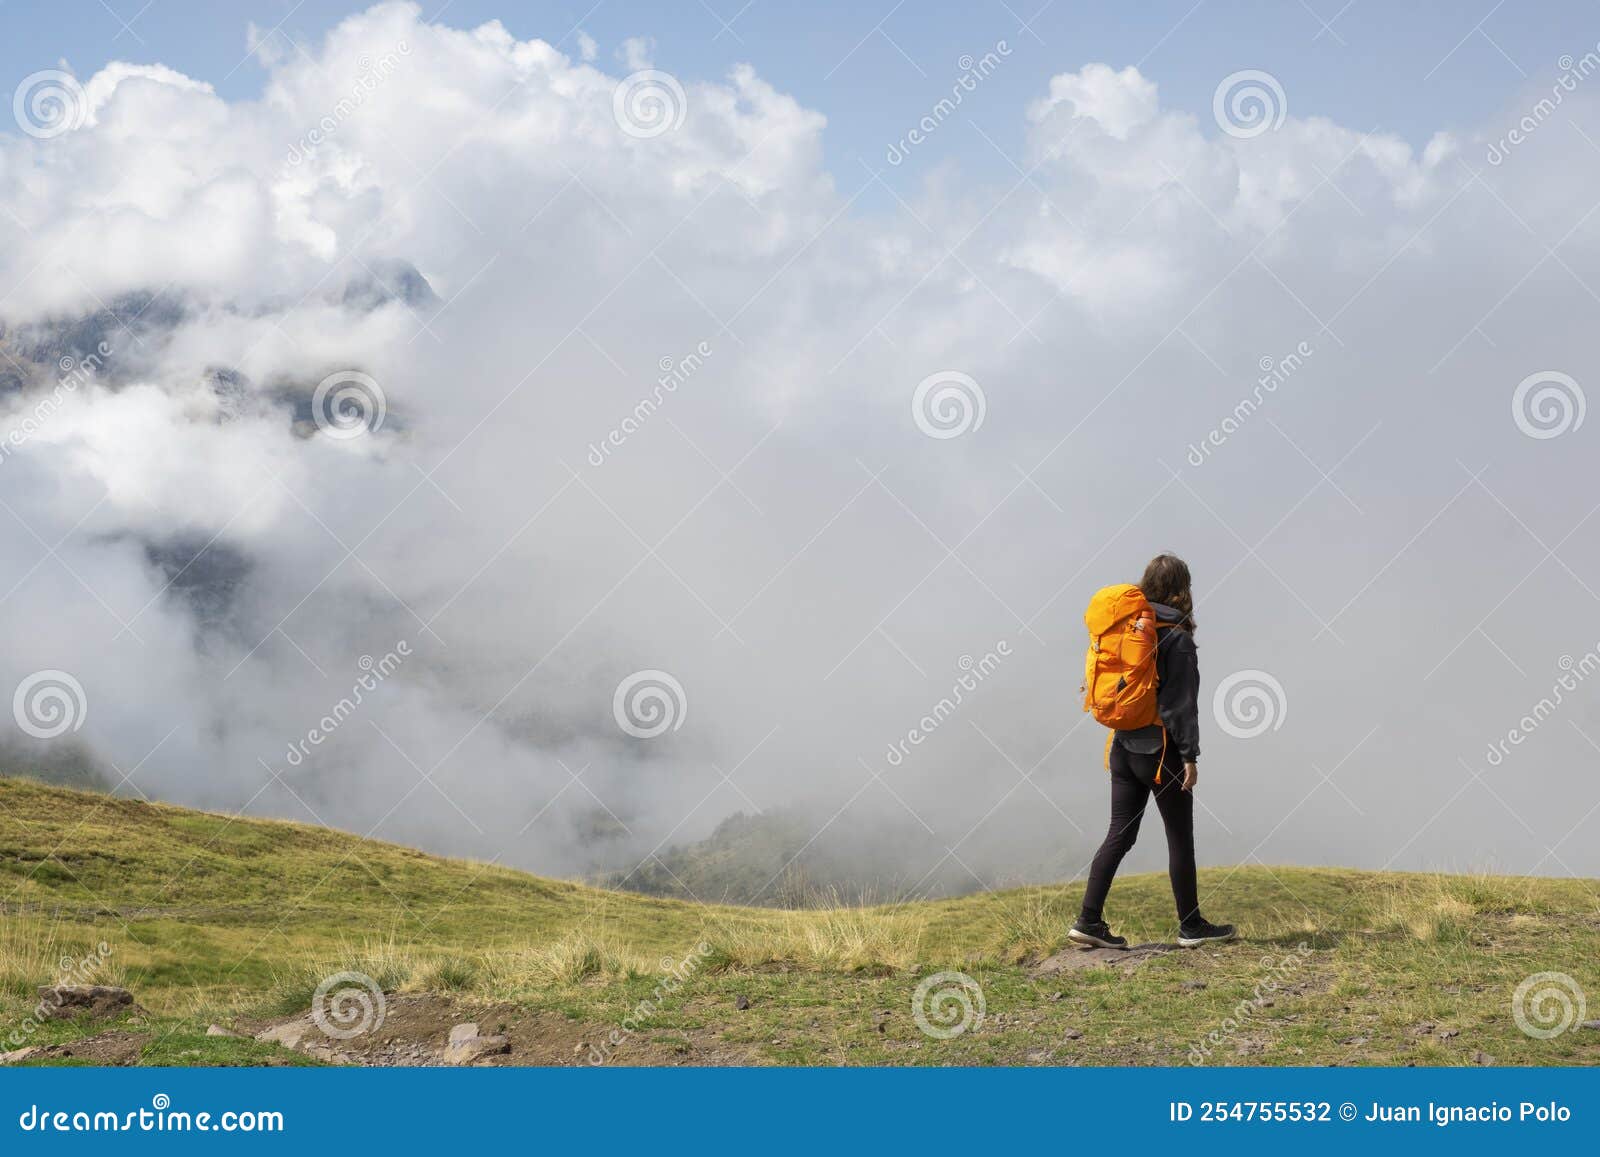 girl hiking in the pyrenees, with the mountains in the clouds in the background